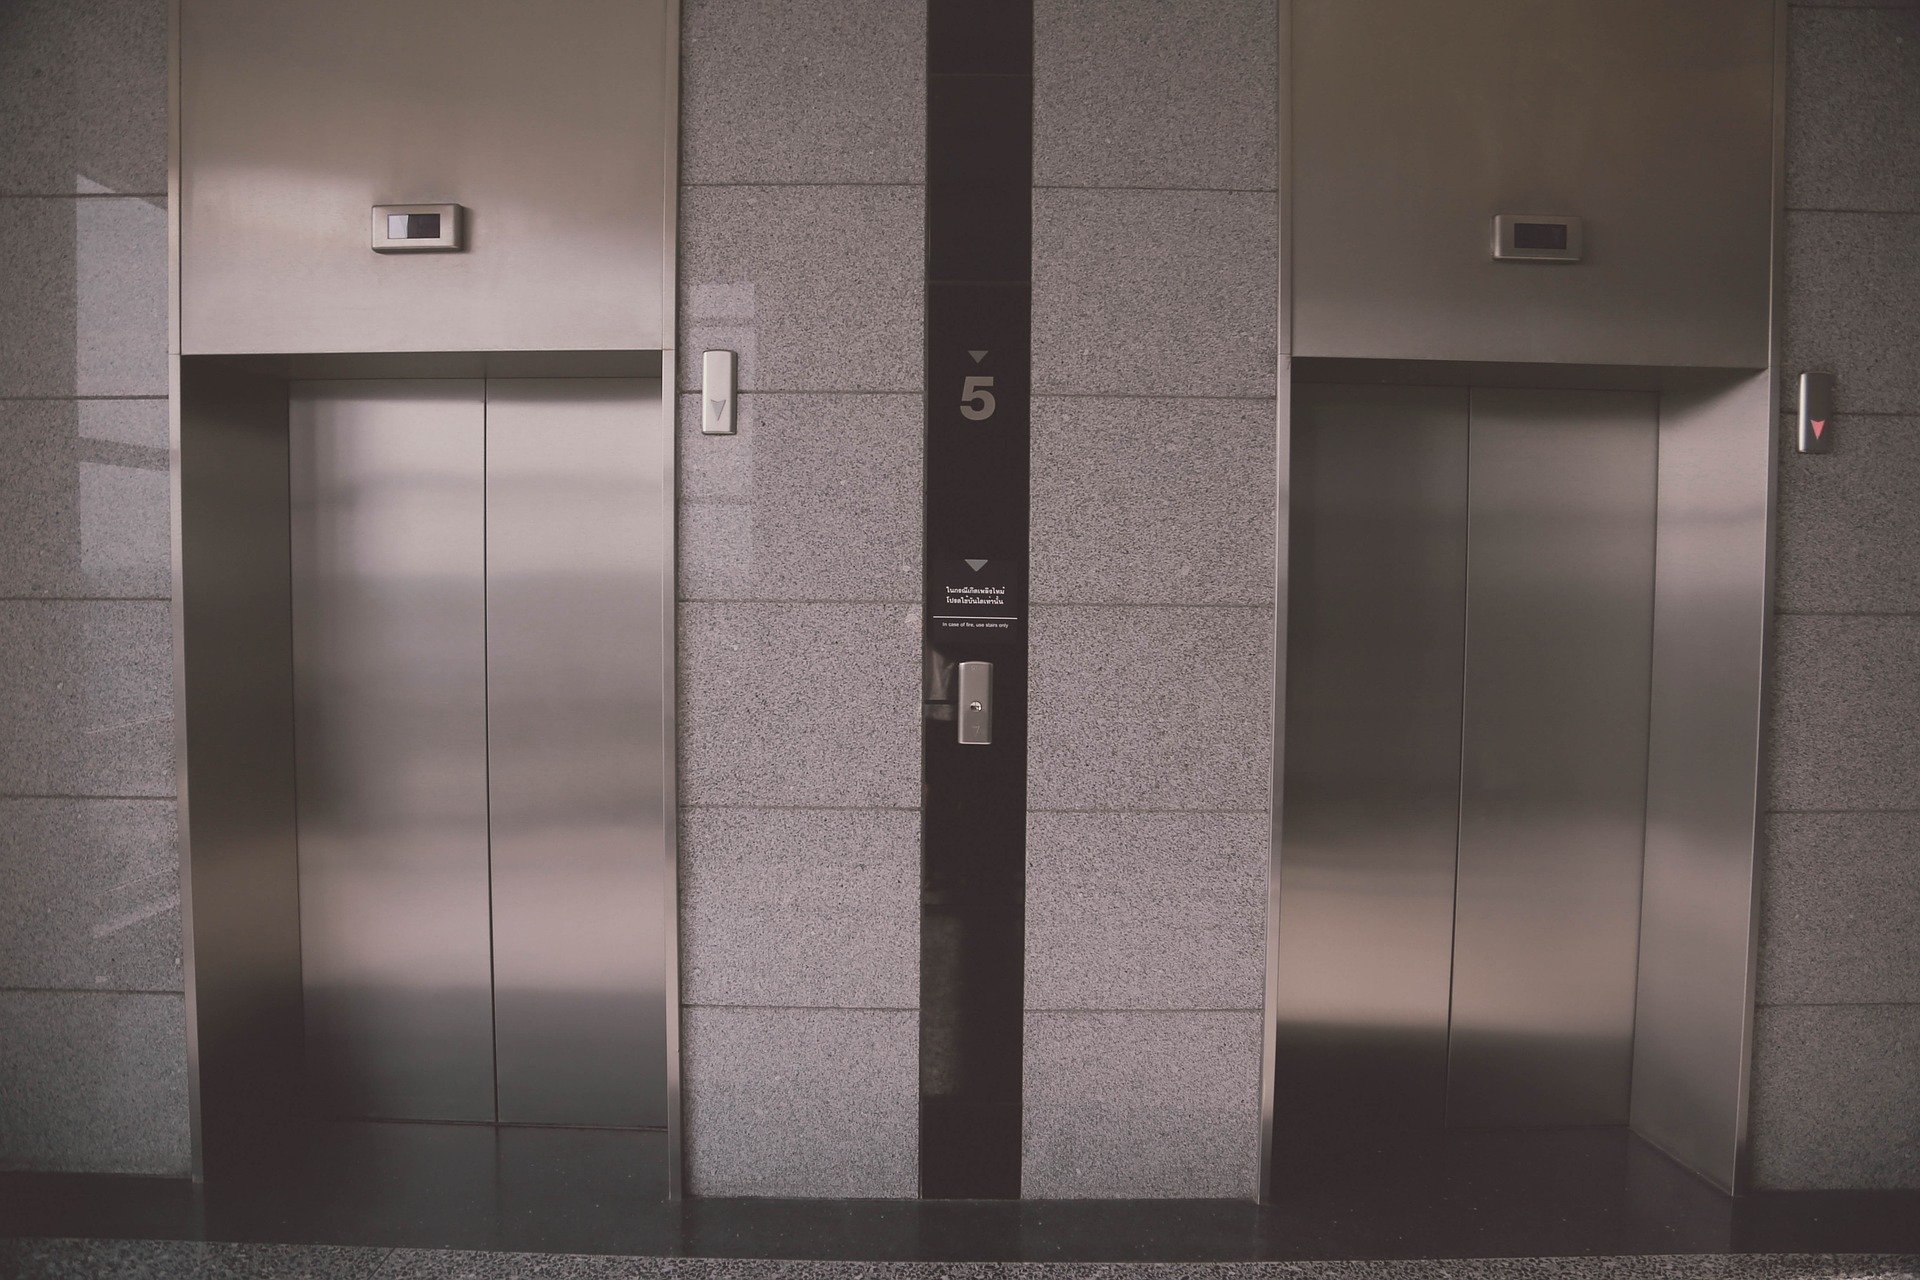 The image shows two closed stainless steel elevator doors located in a modern building lobby. The wall around the elevators is covered in a gray stone finish. A control panel with an indicator shows the number 5 between the two elevators.